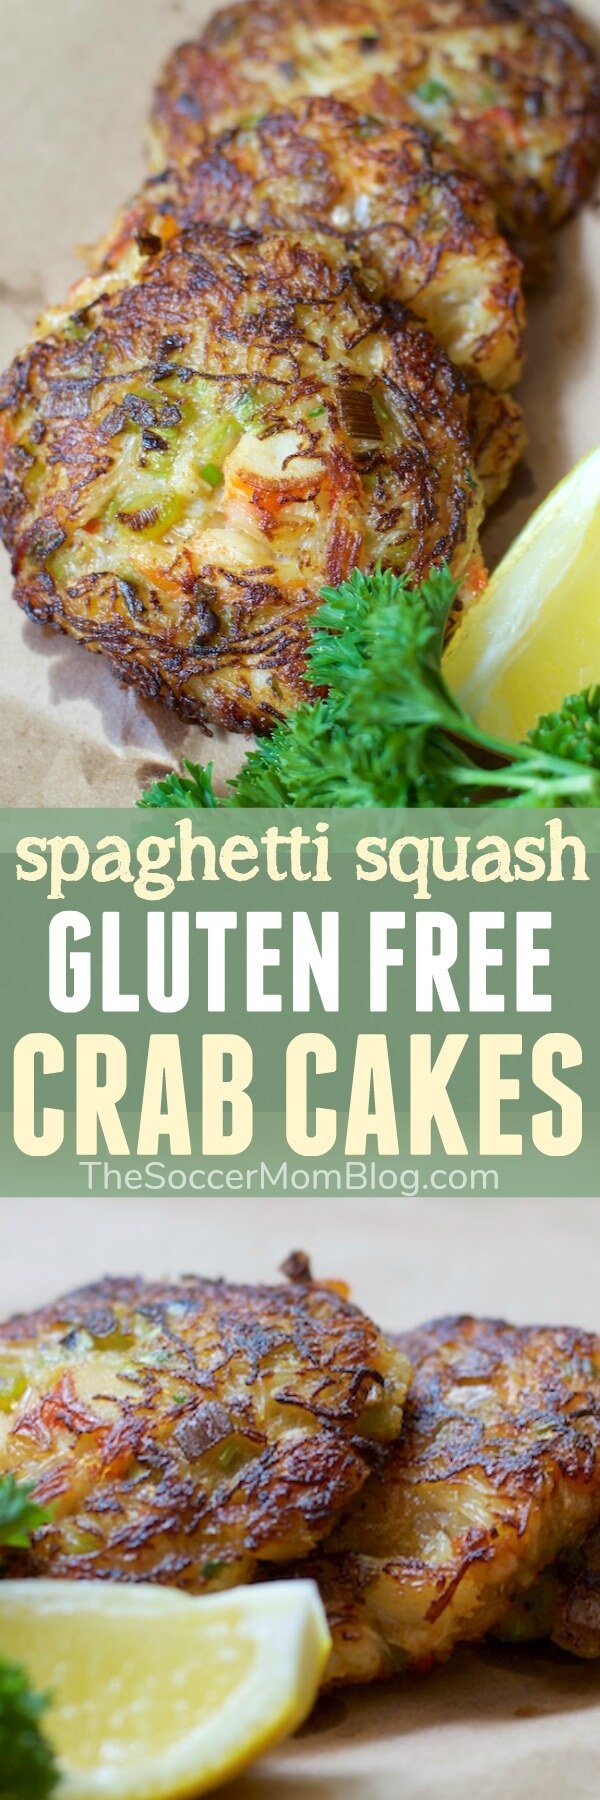 All good stuff and no filler! These gluten free crab cakes are made with TONS of crab, plus a spaghetti squash ingredient swap makes them lower in carbs!